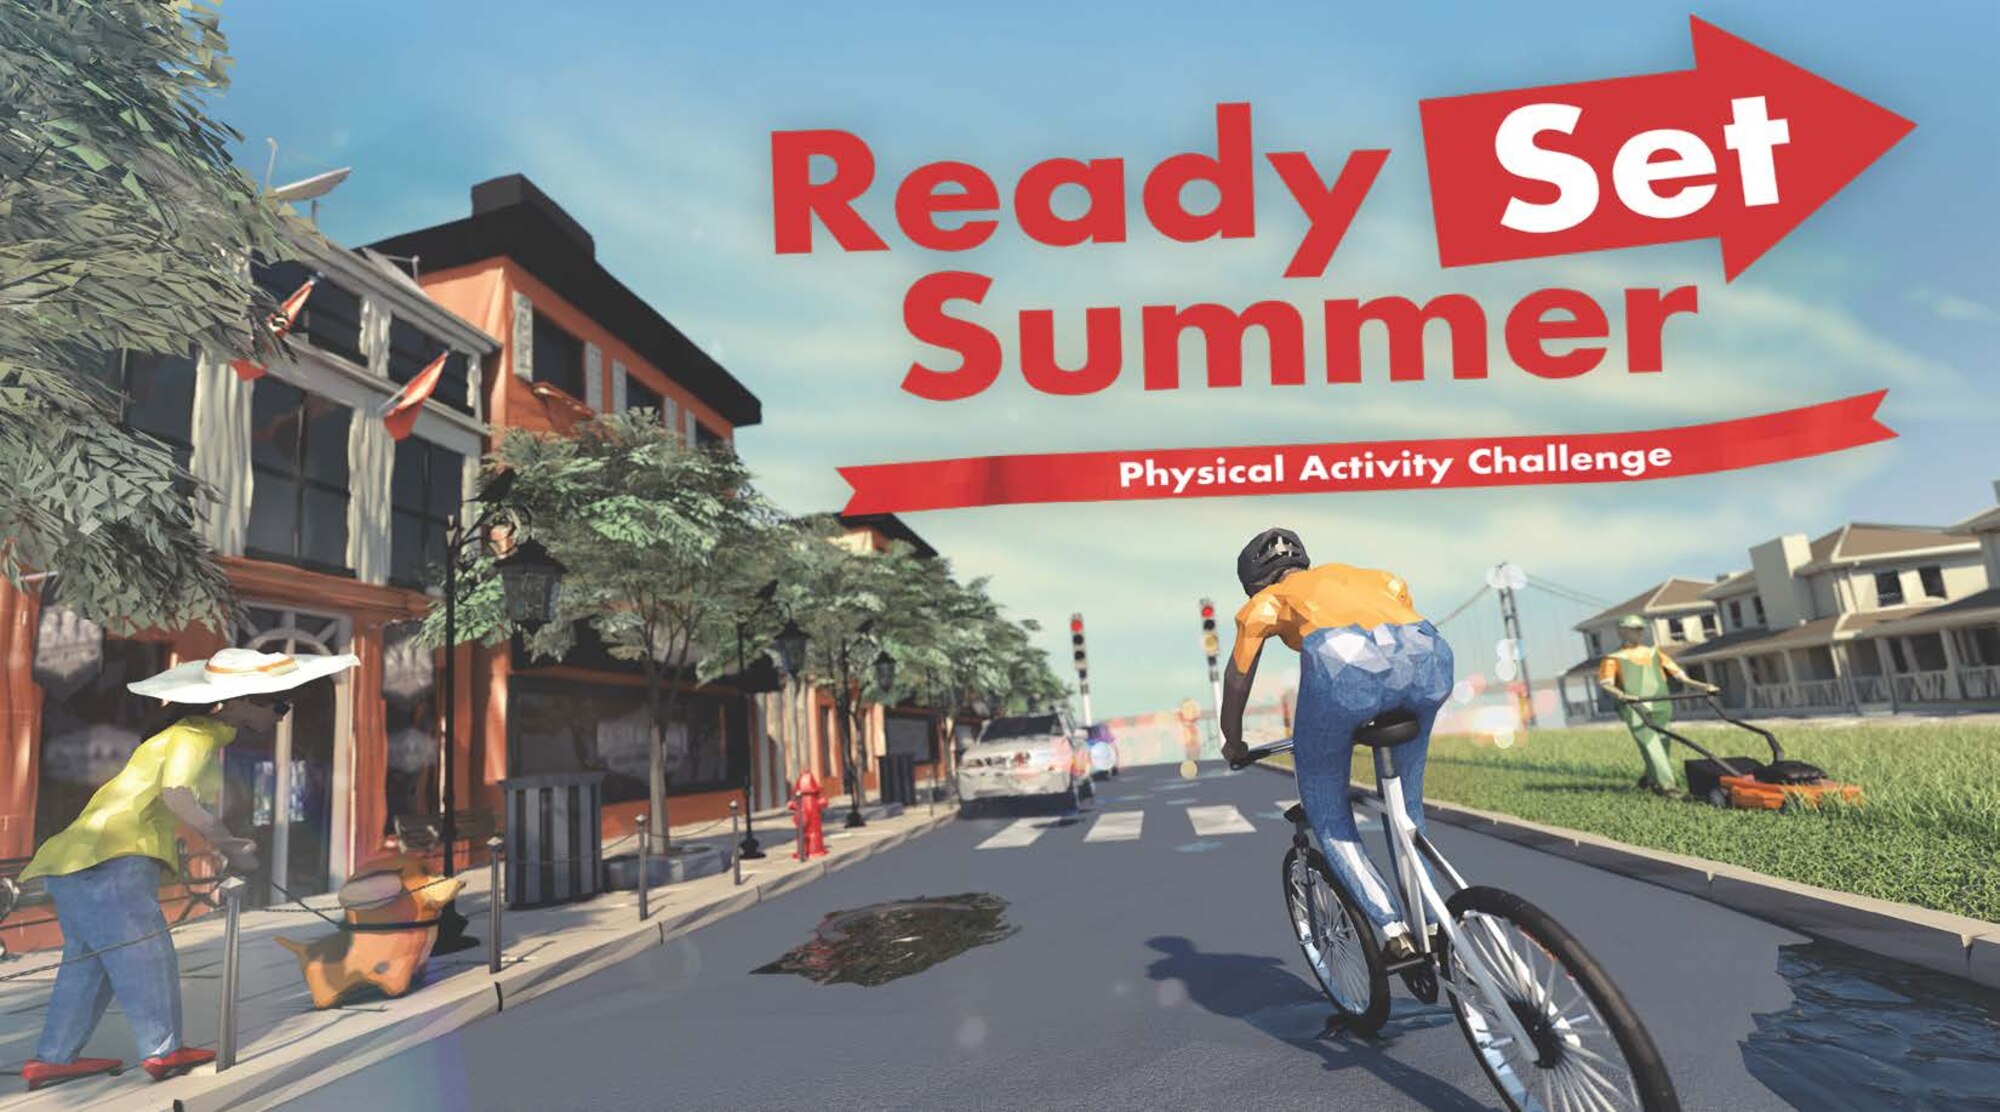 The Ready, Set, Summer' Physical Activity Challenge